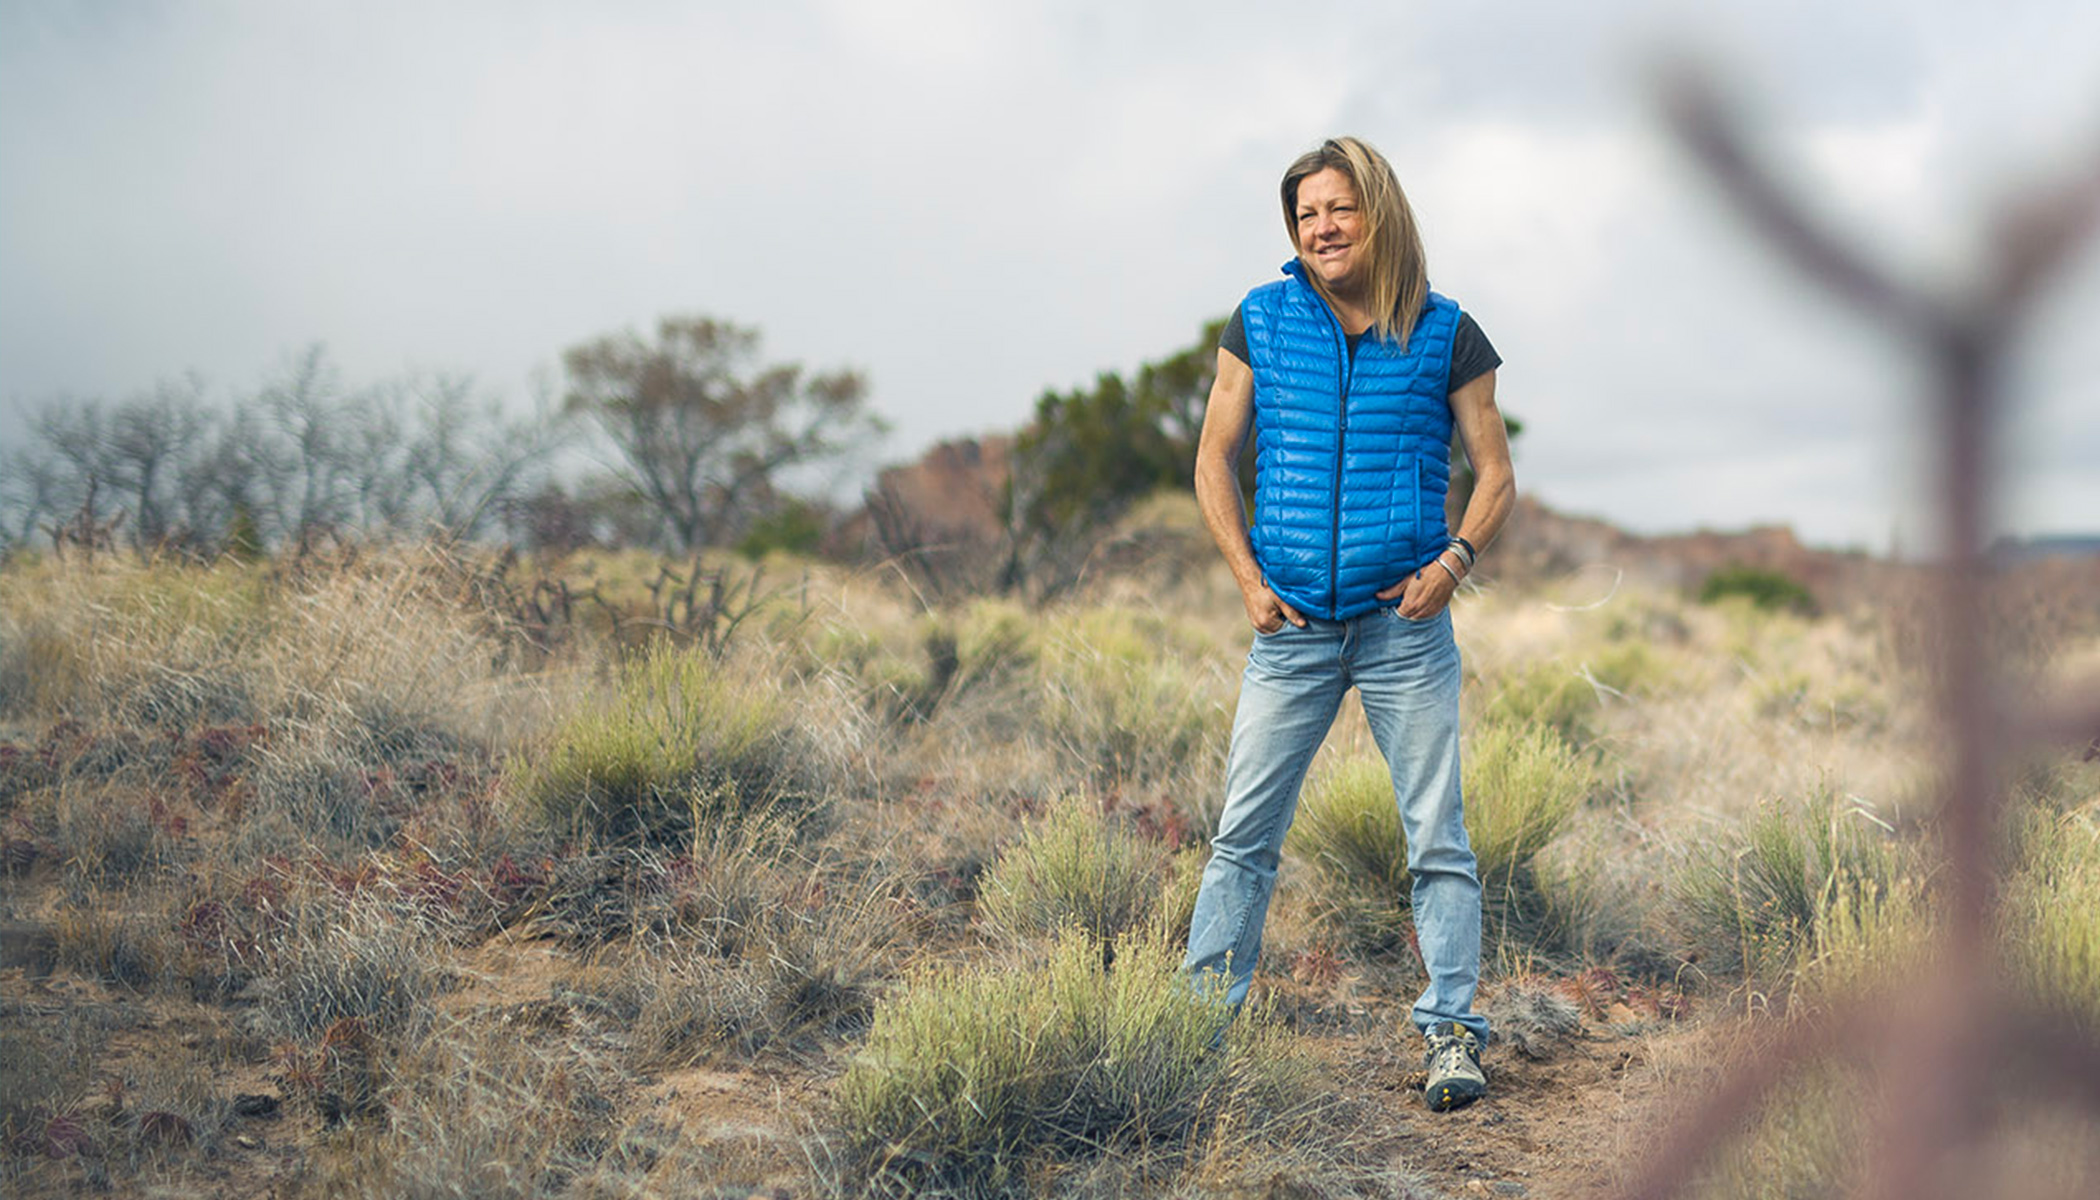 A woman wearing blue jeans and a puffy vest smiles and stands in a field with her hands in her pockets.